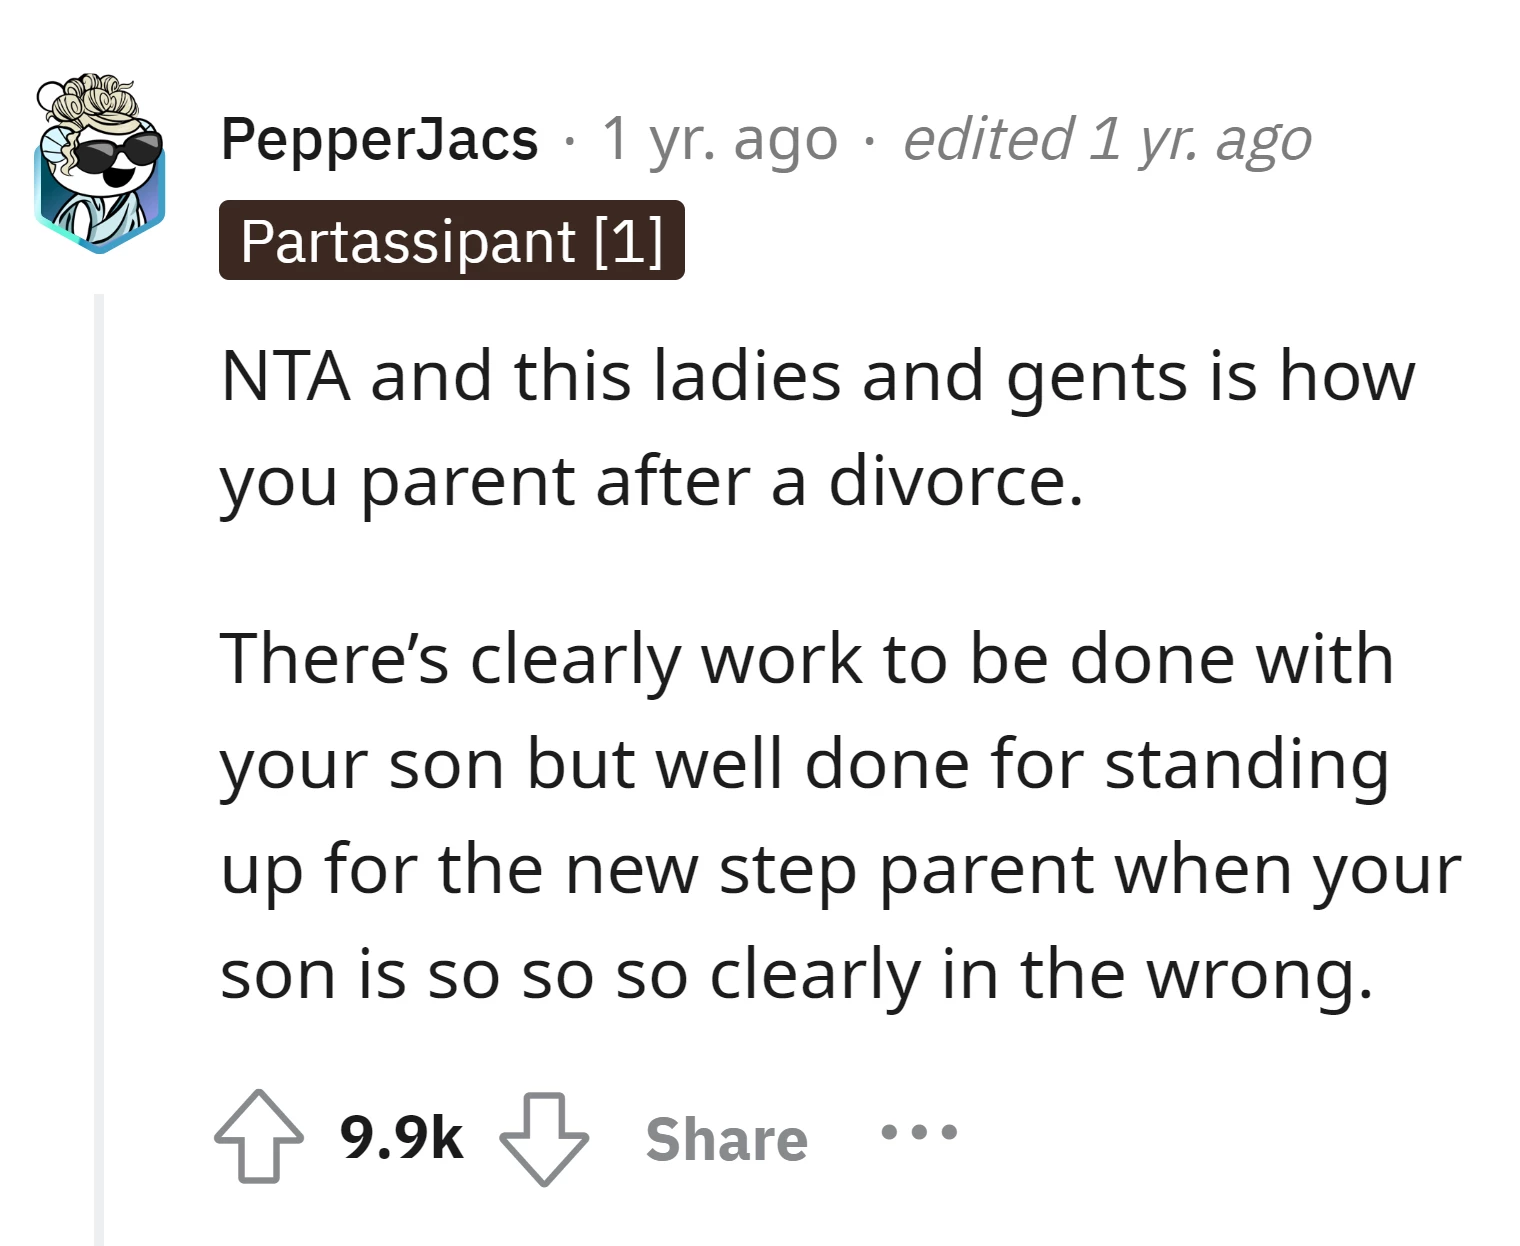 Commenter commends OP for standing up for the step-parent